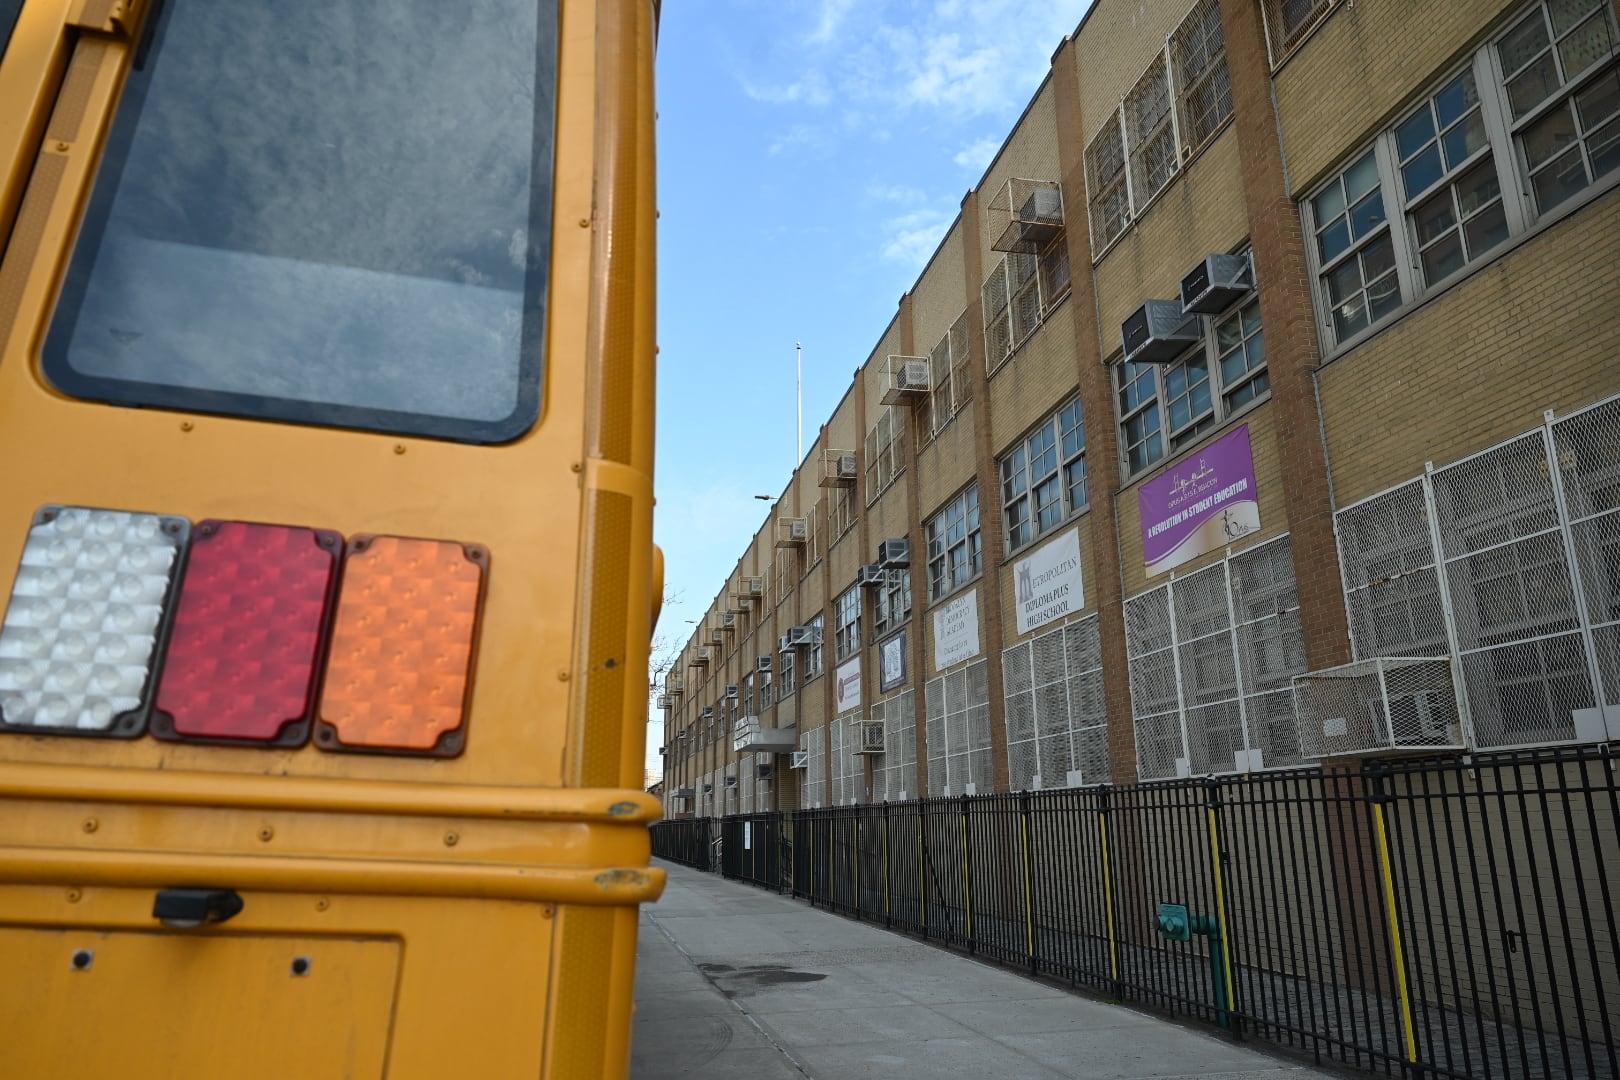 A close up of the back of a yellow school bus next to a school building.